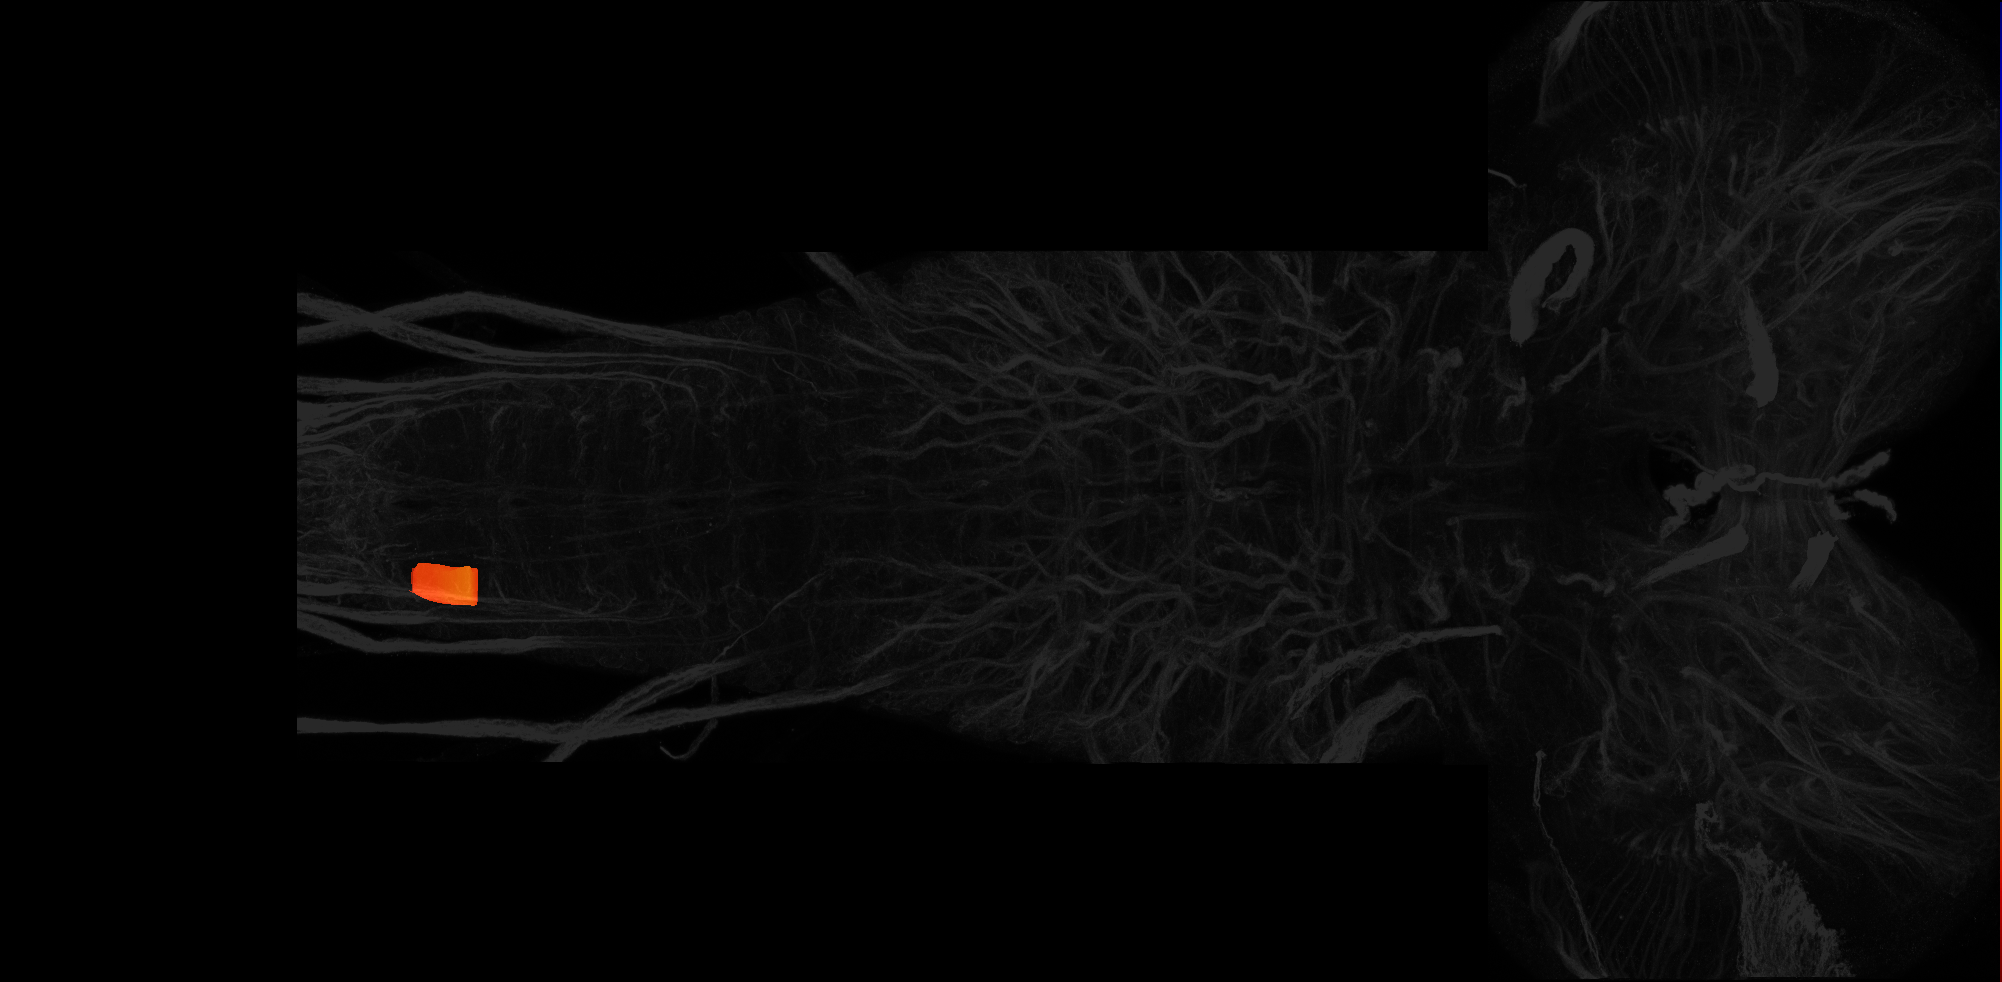 right centrolateral neuropil of A8 on L3 CNS template, Wood2018